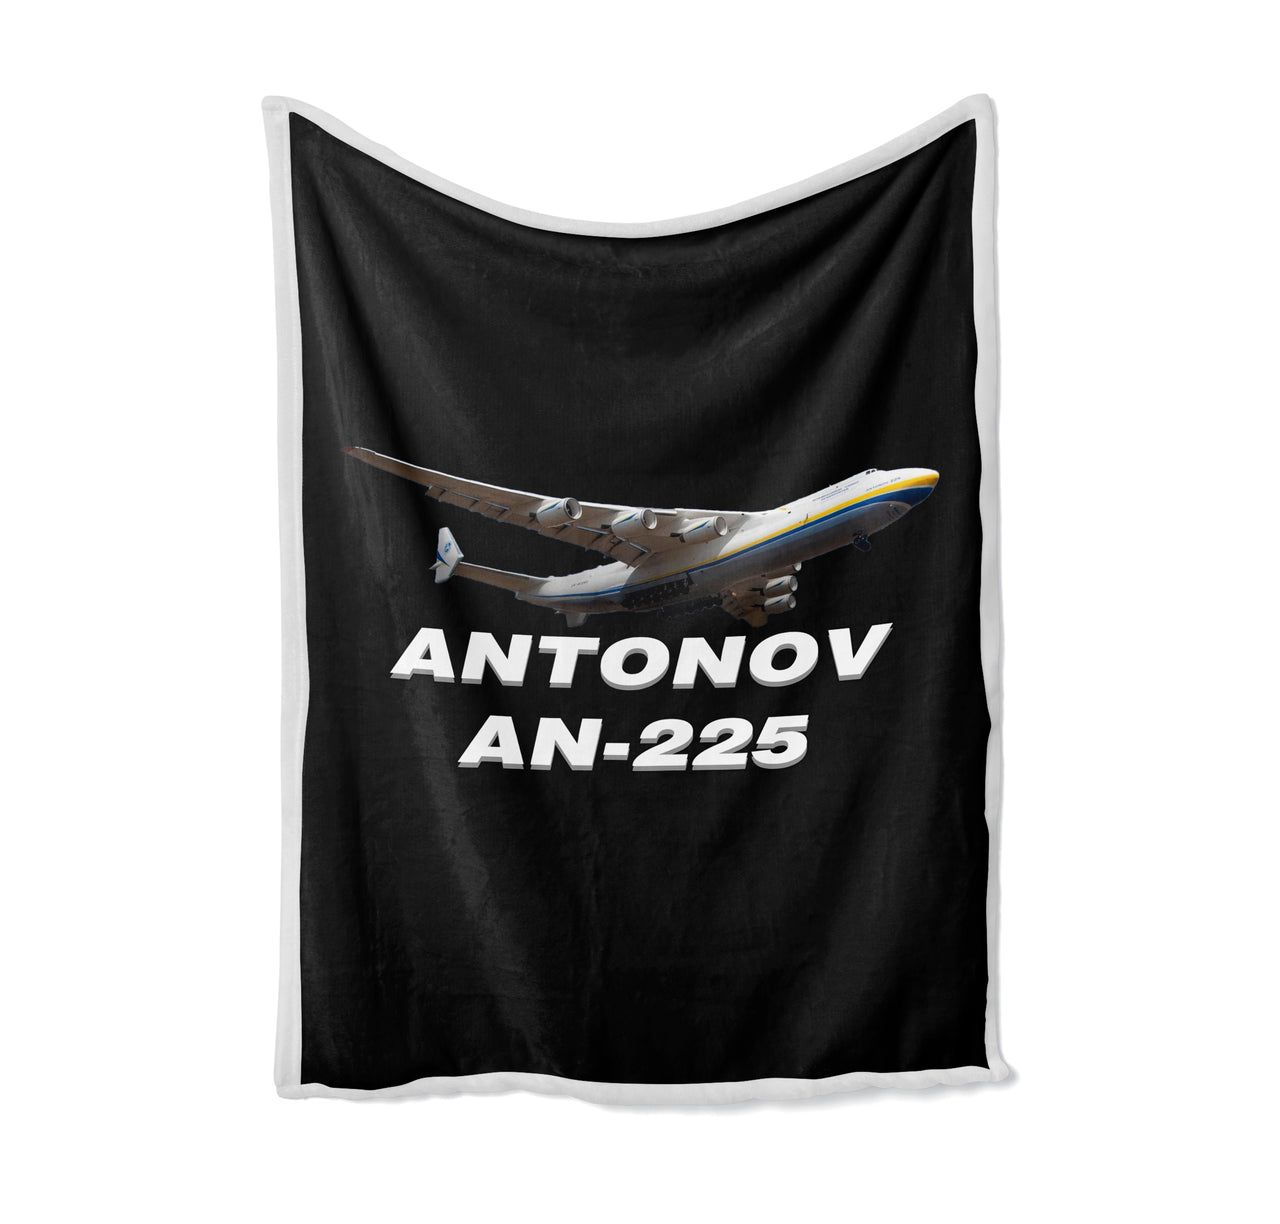 Antonov AN-225 (15) Designed Bed Blankets & Covers